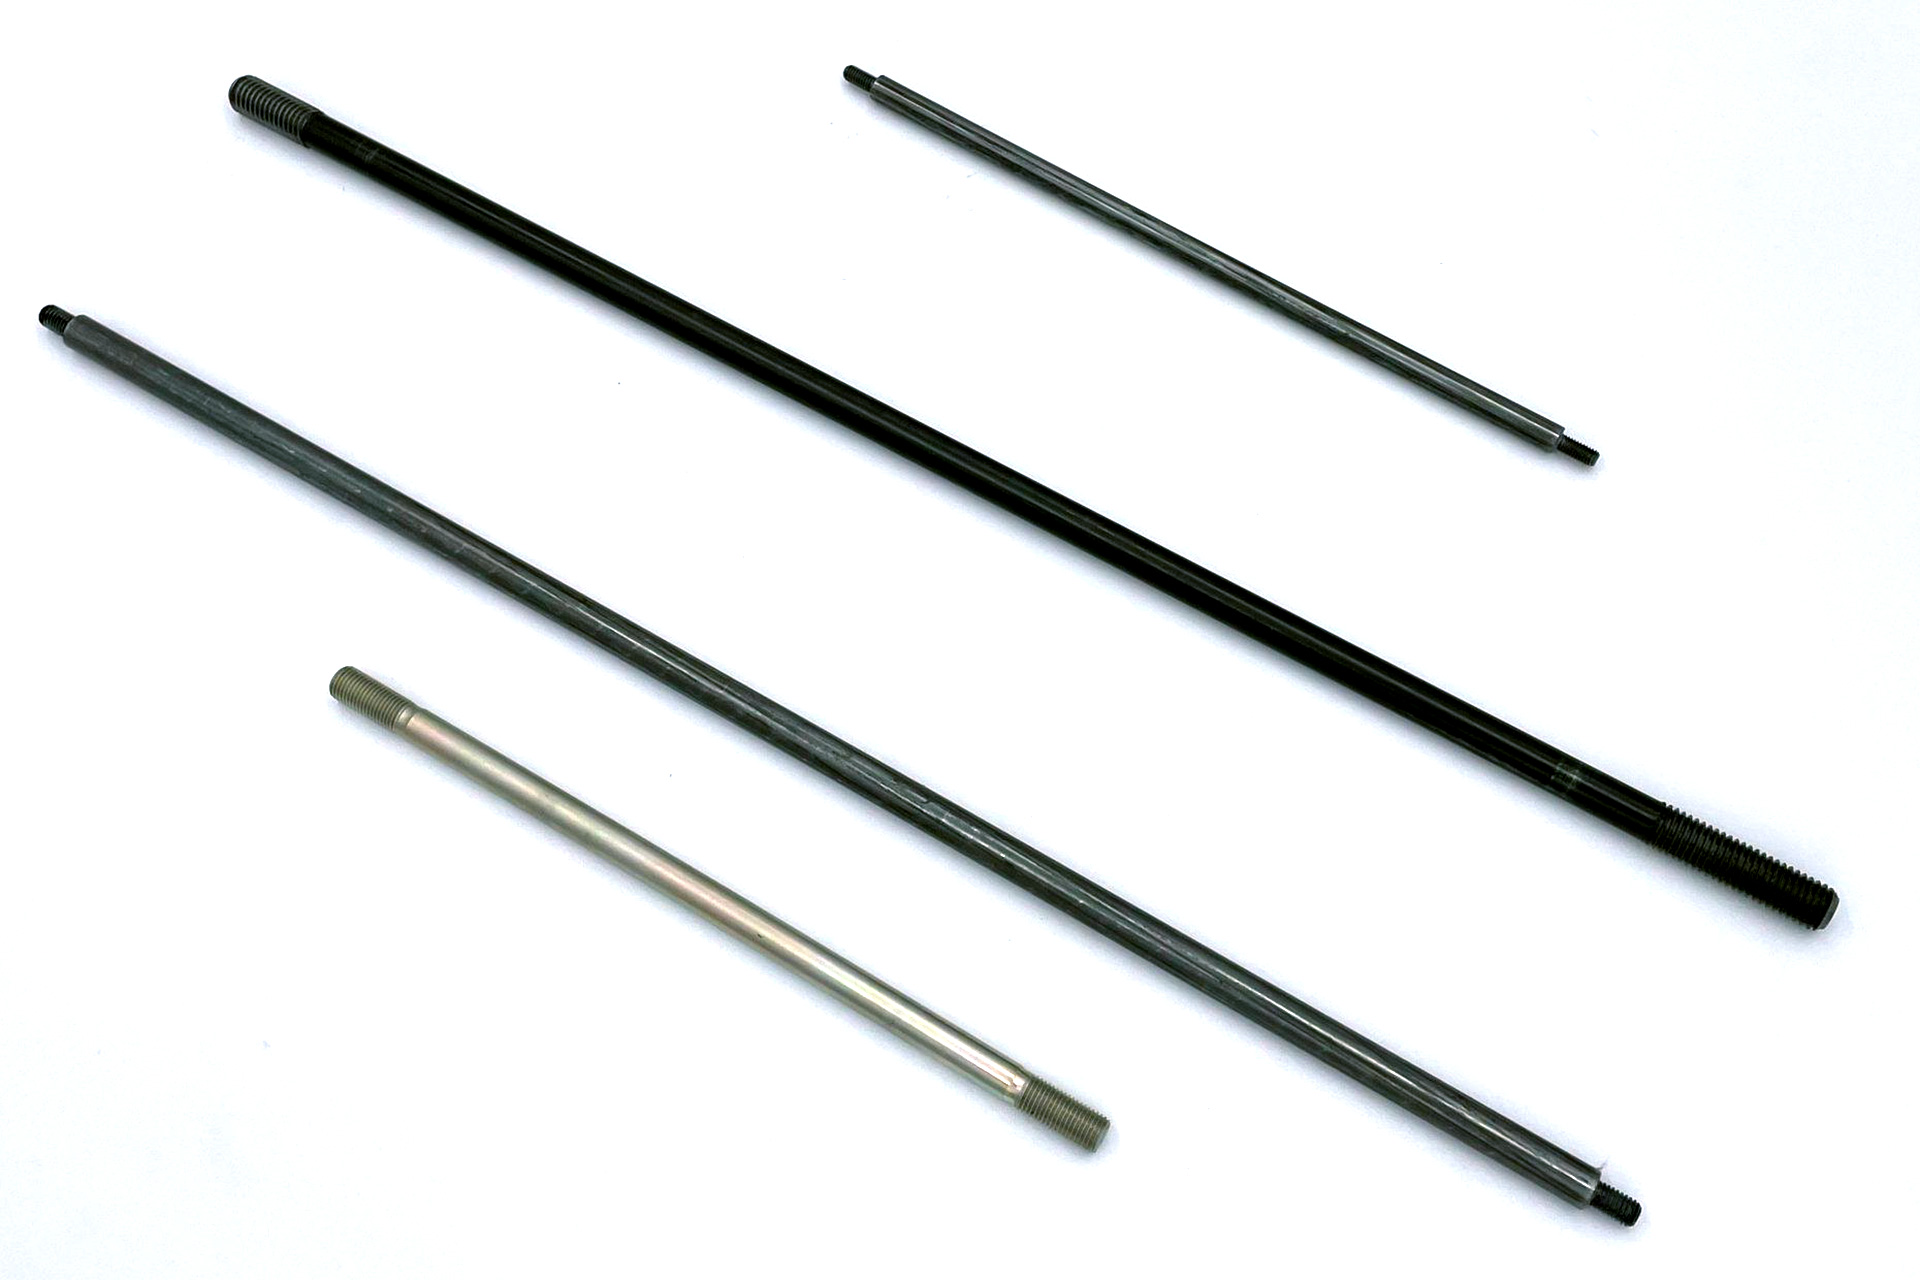 Several examples of our tie rod production capabilities